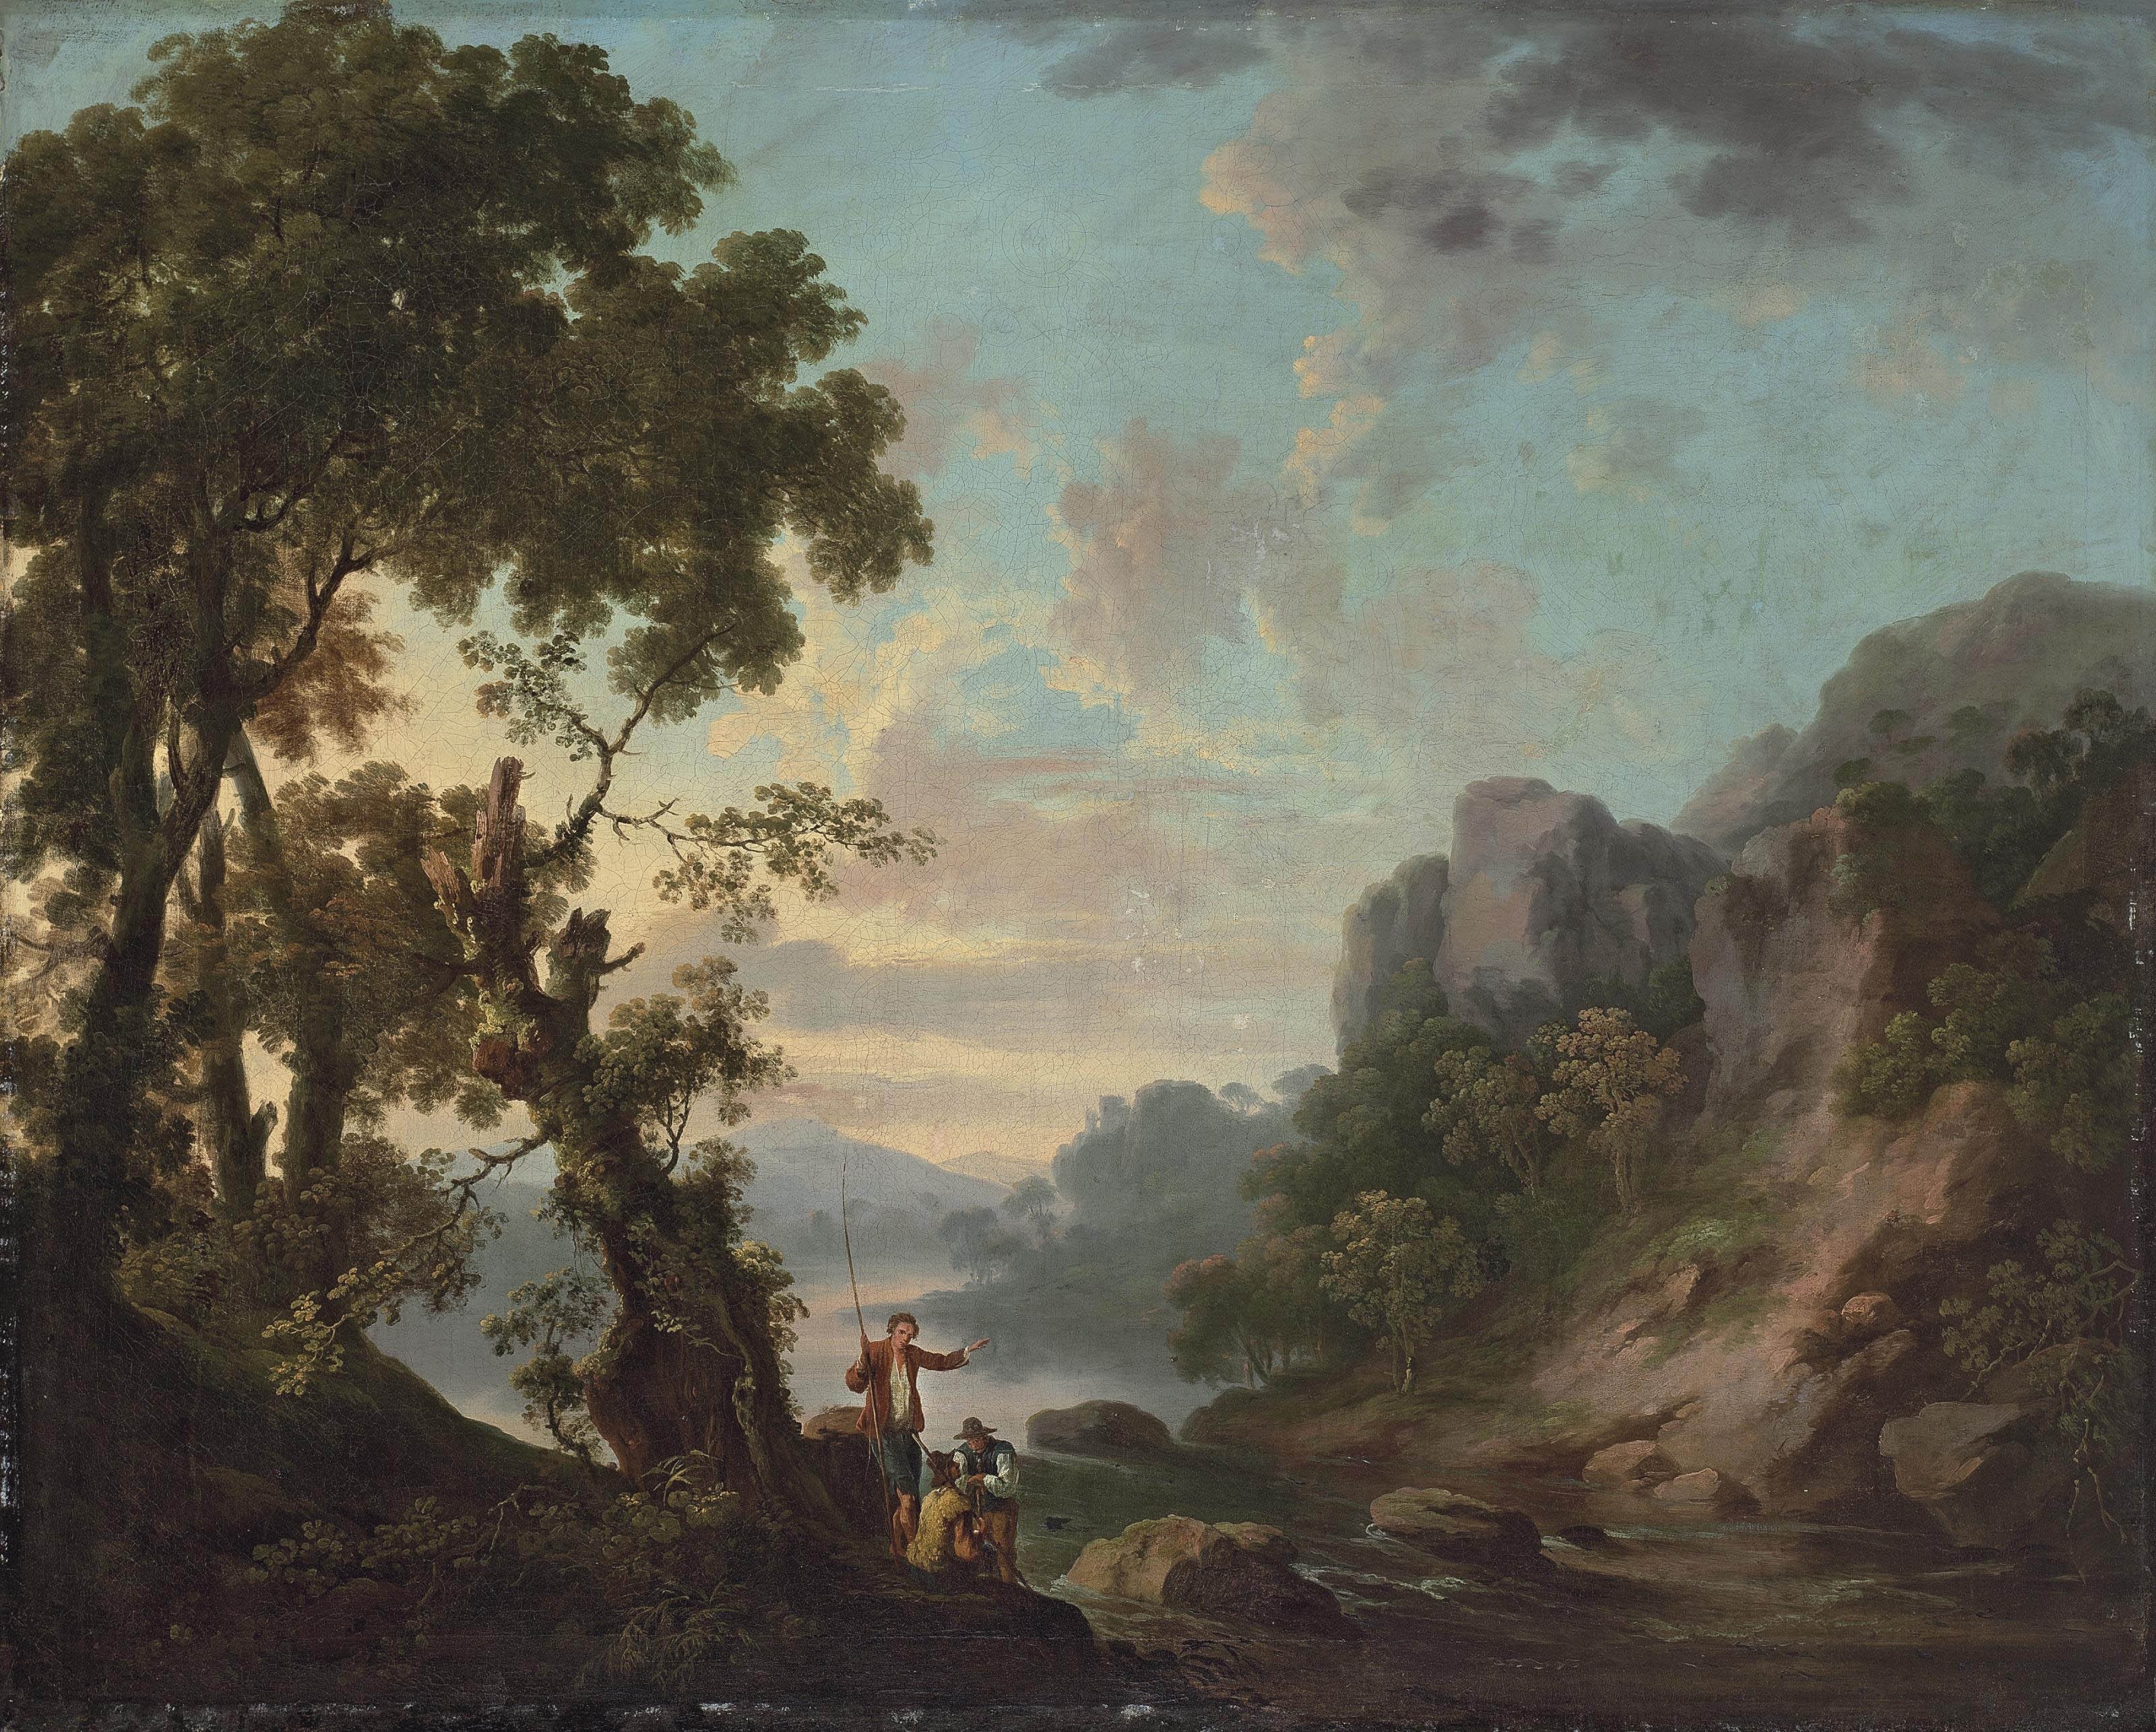 George Barret - Wooded landscape with a lake, anglers in the foreground